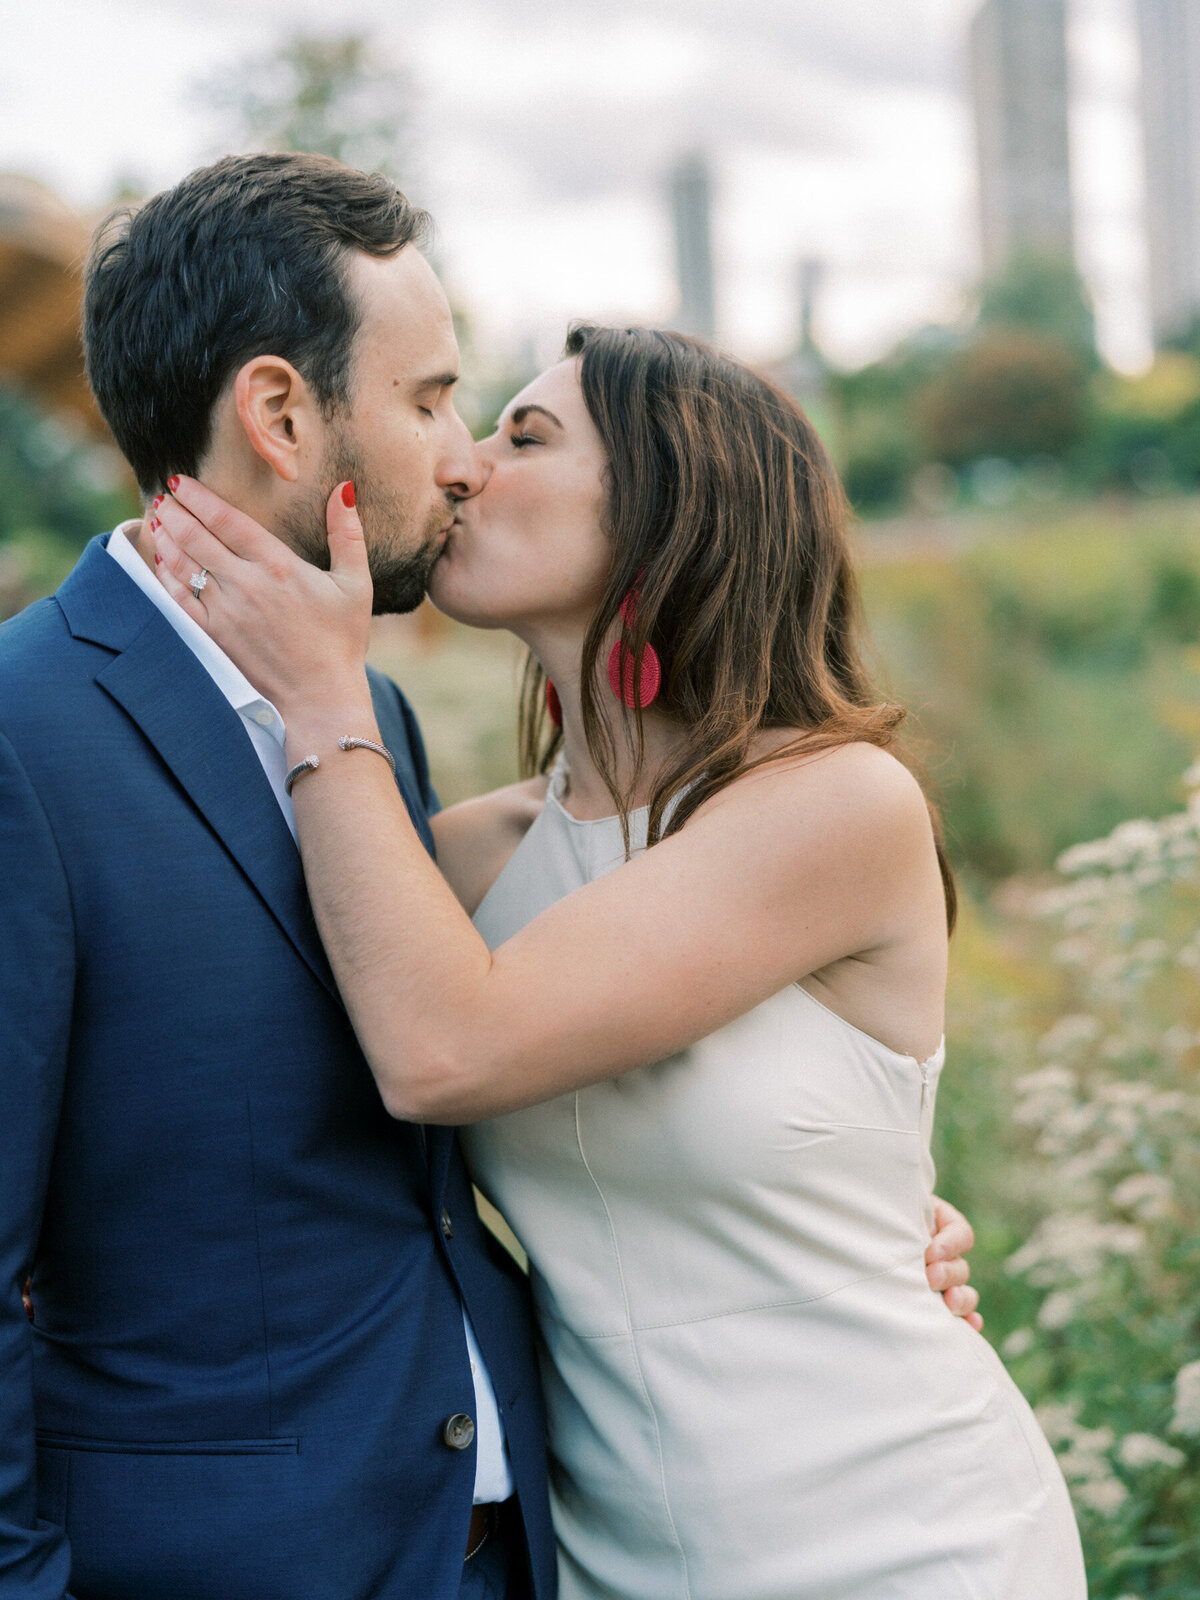 Lincoln Park Chicago Fall Engagement Session Highlights | Amarachi Ikeji Photography 09